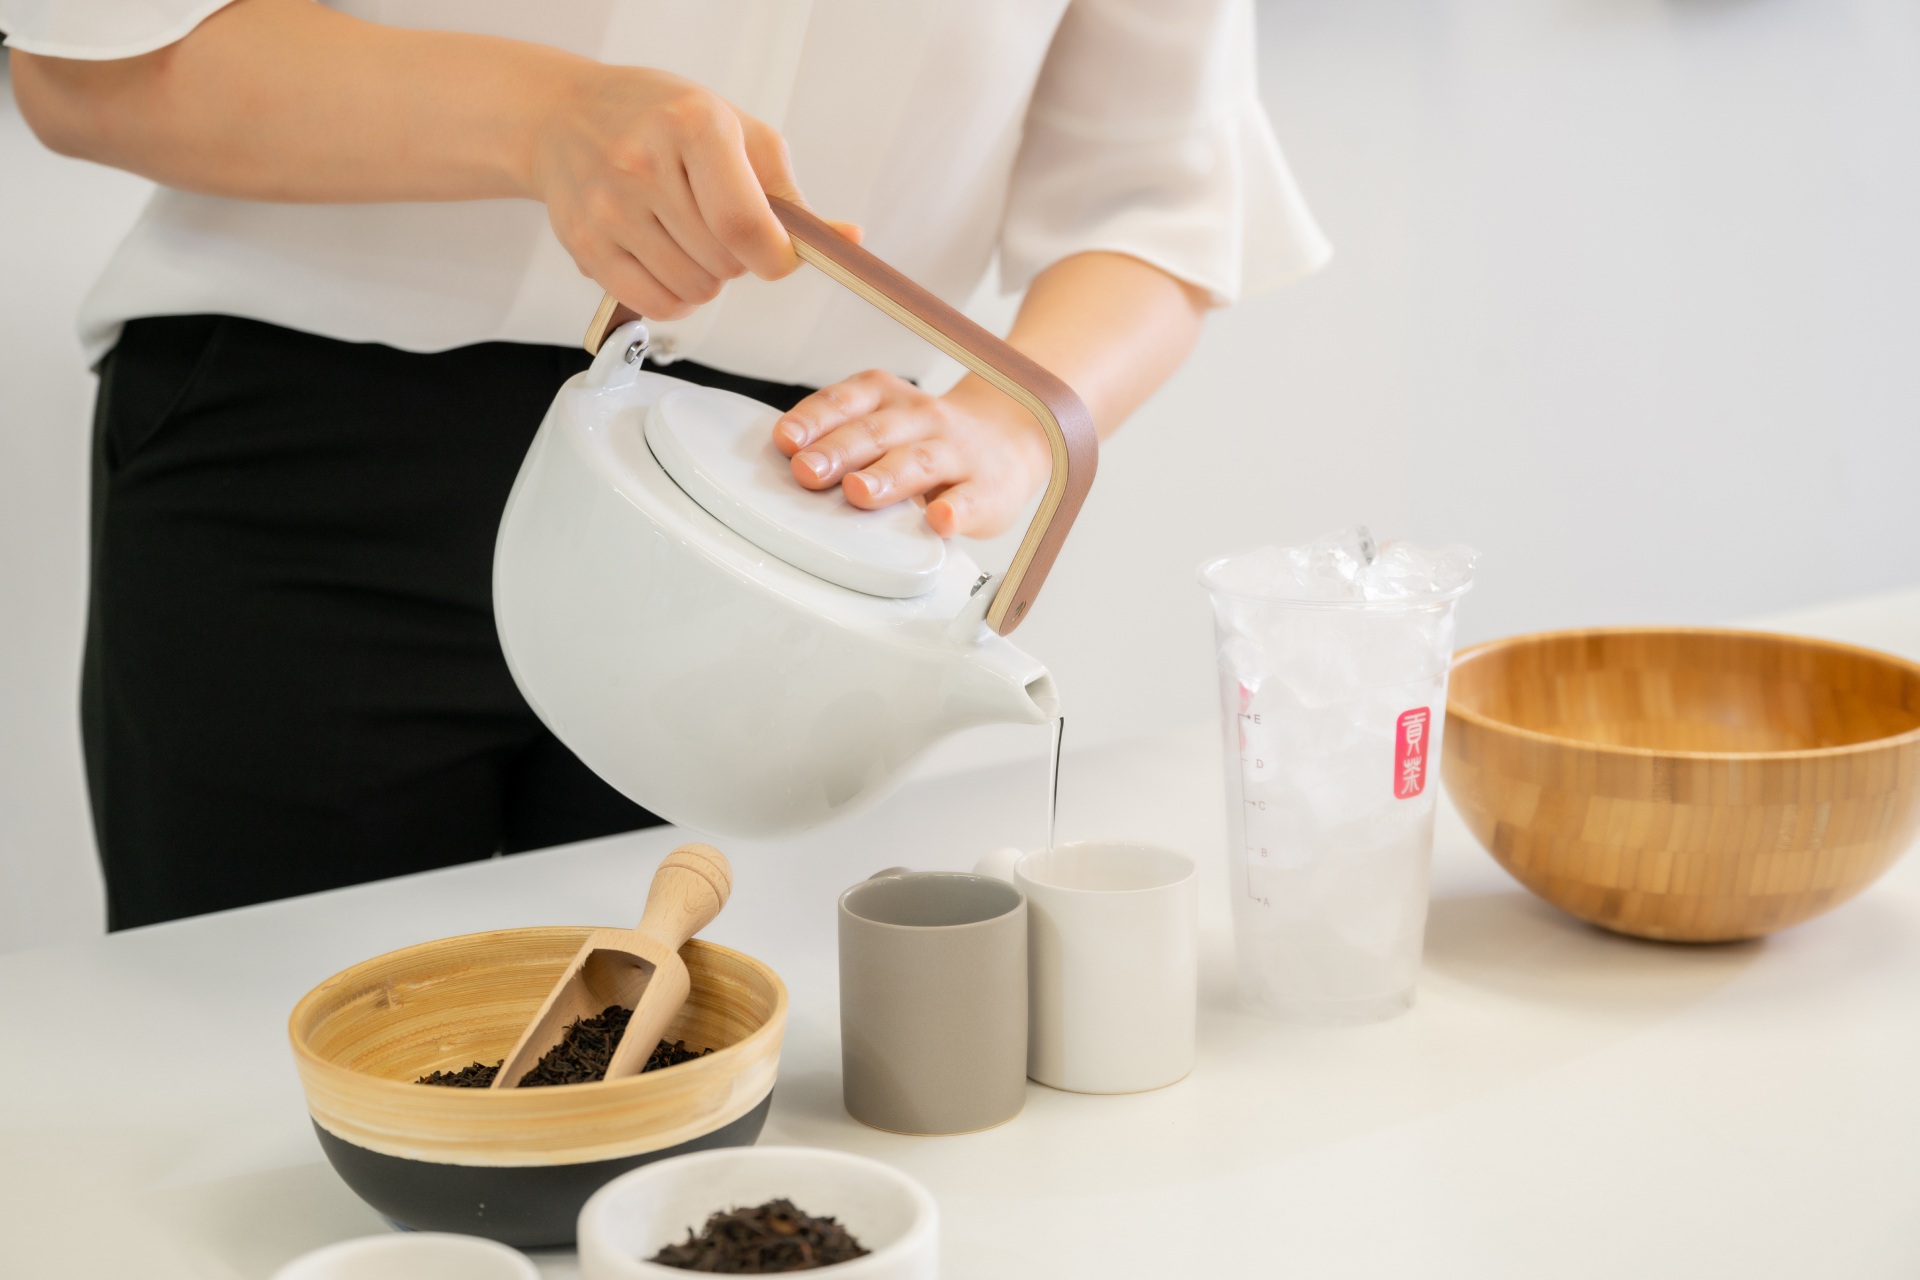 Gong Cha tea being prepared and poured